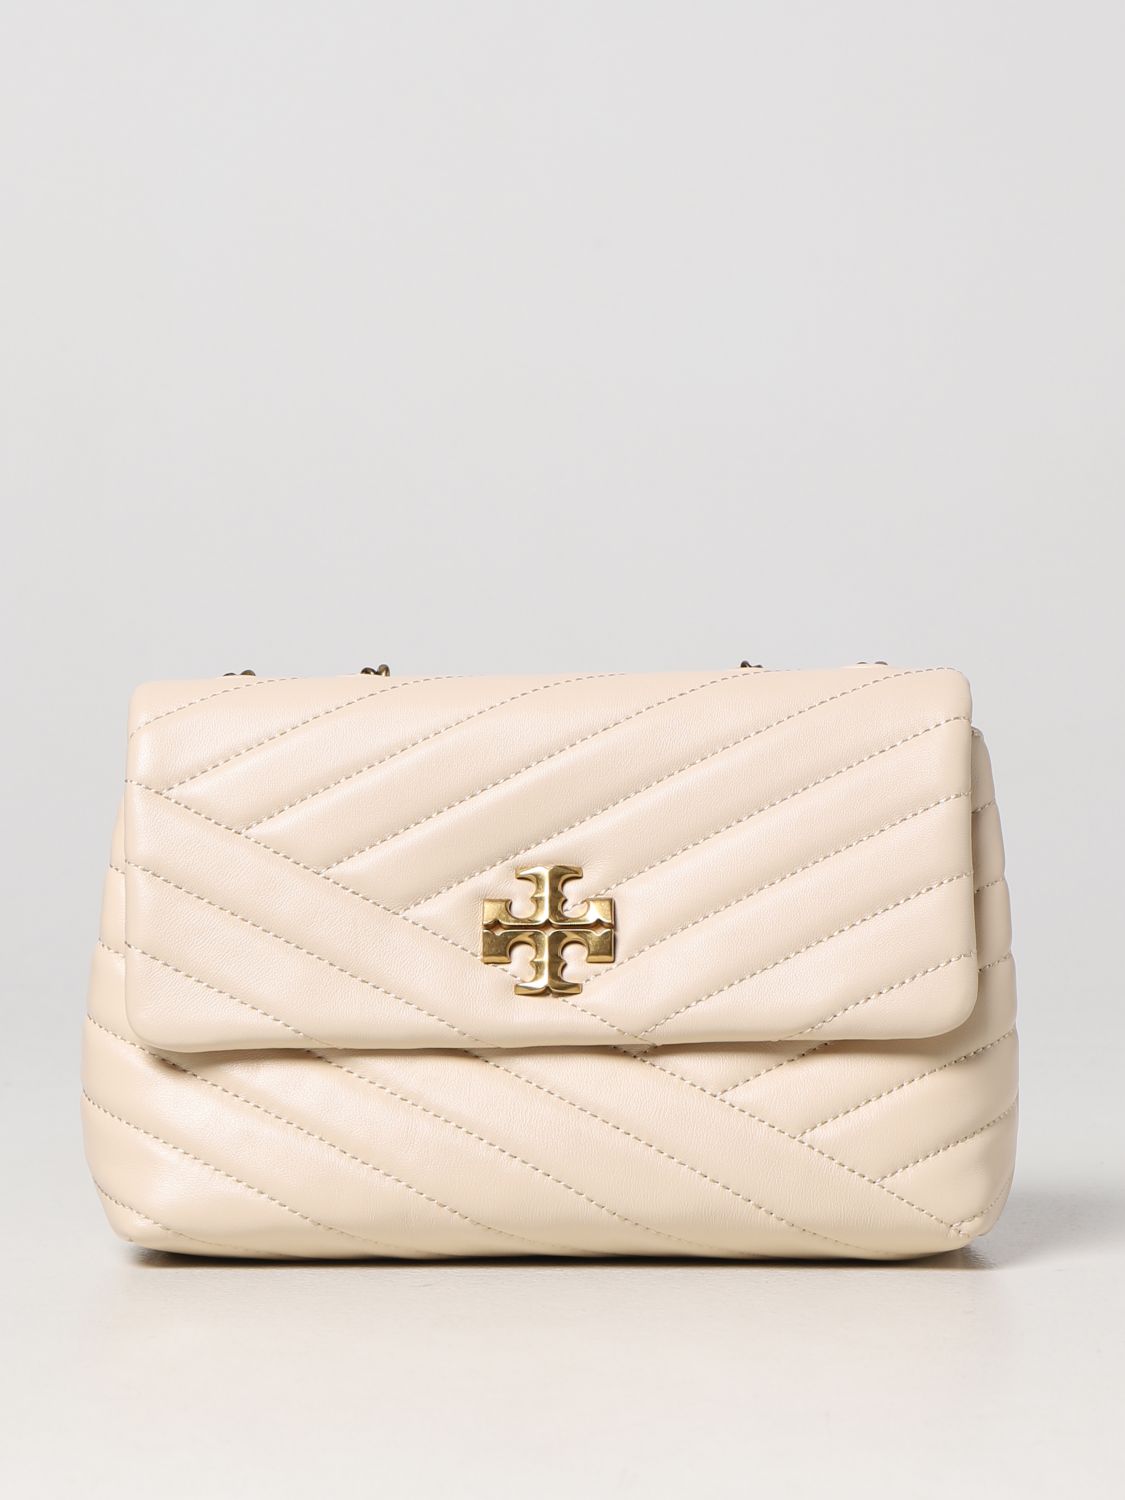 Kira Quilted Leather Shoulder Bag in Black - Tory Burch